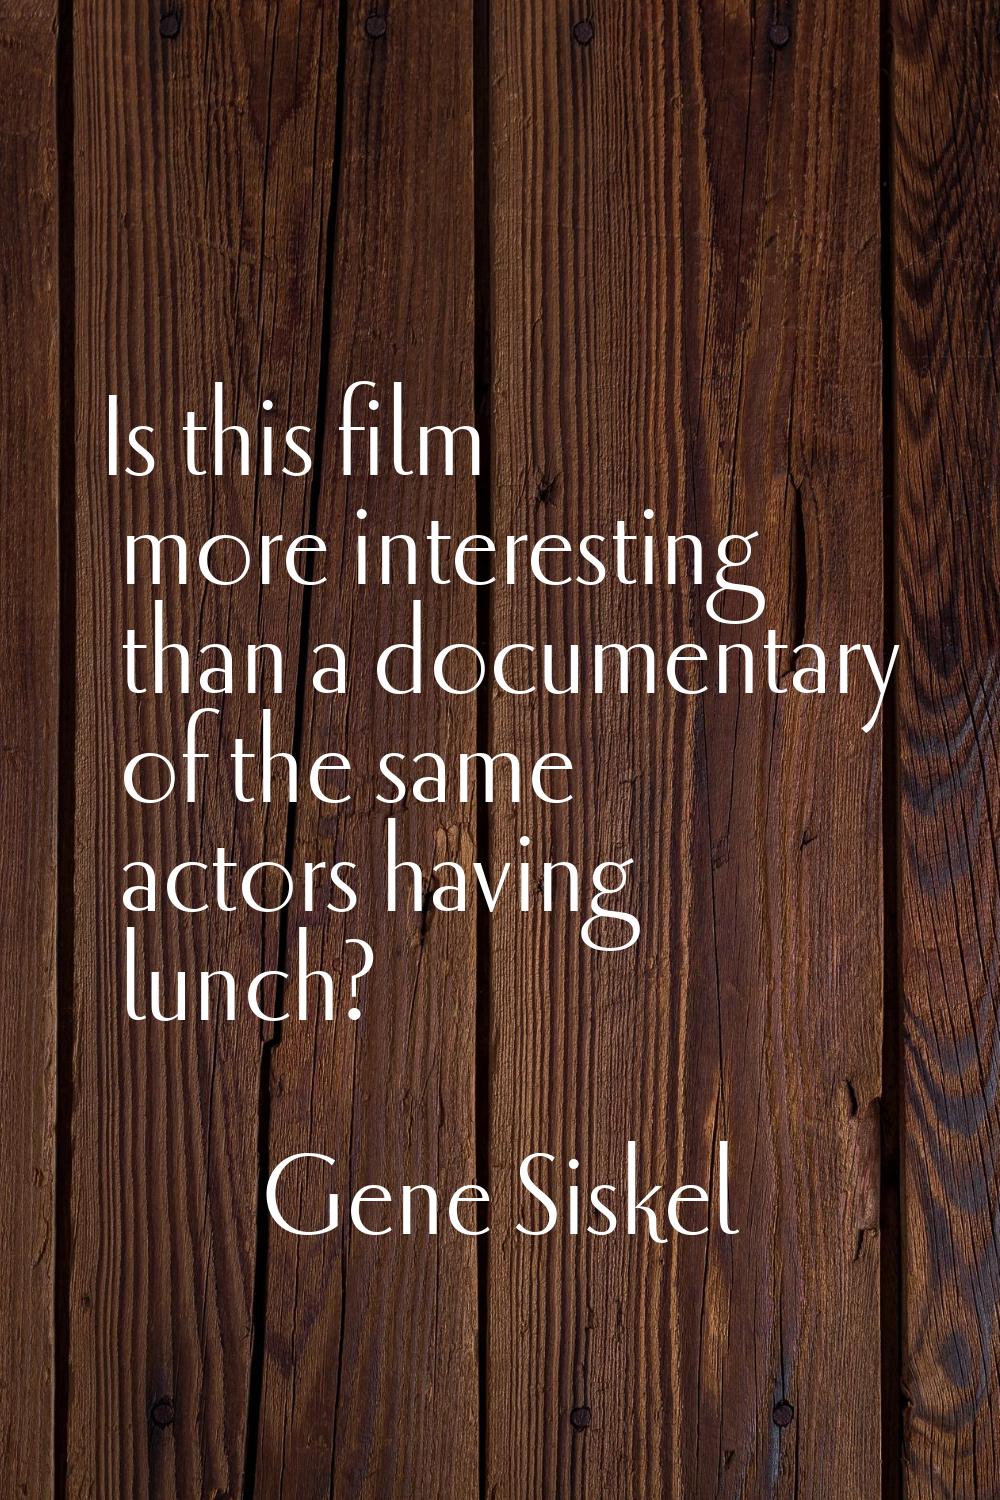 Is this film more interesting than a documentary of the same actors having lunch?